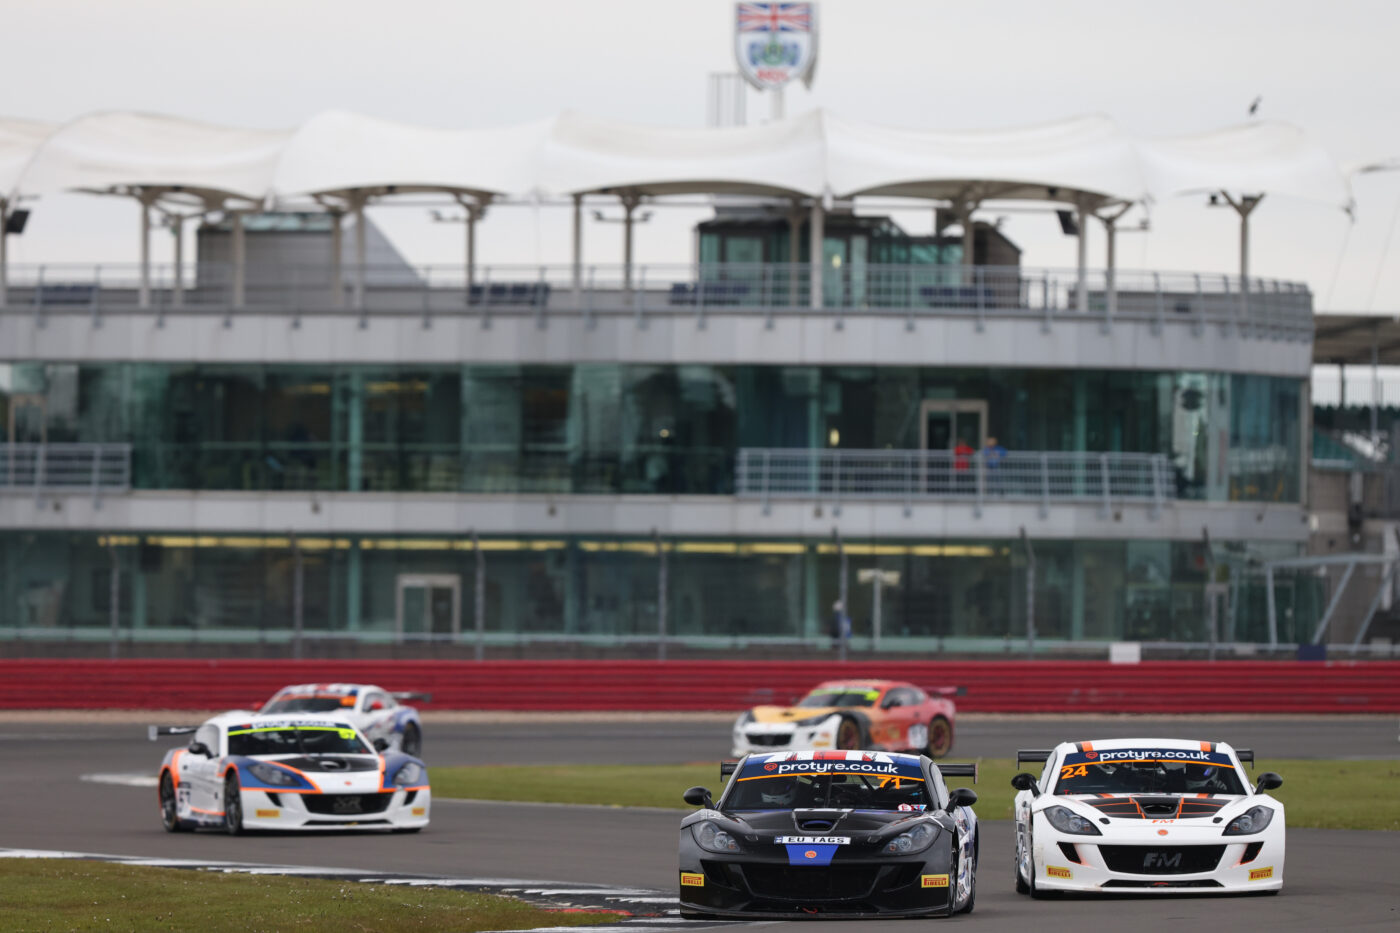 Only 5 Points Split The Top 3 As GT Championship Heads To Donington Park